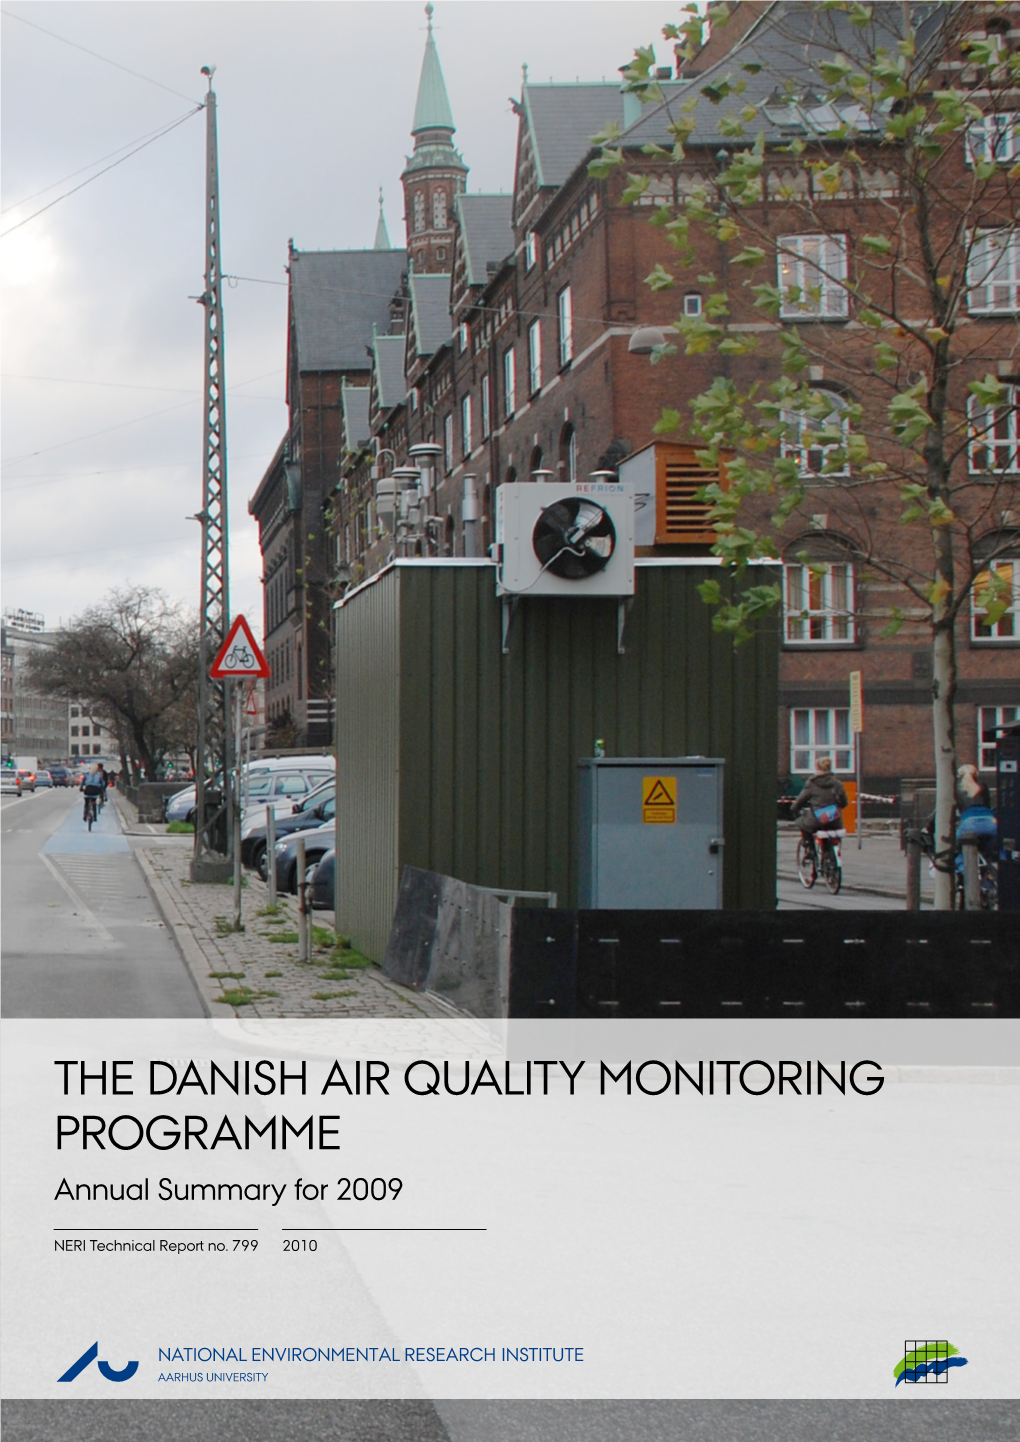 THE DANISH AIR QUALITY MONITORING PROGRAMME Annual Summary for 2009